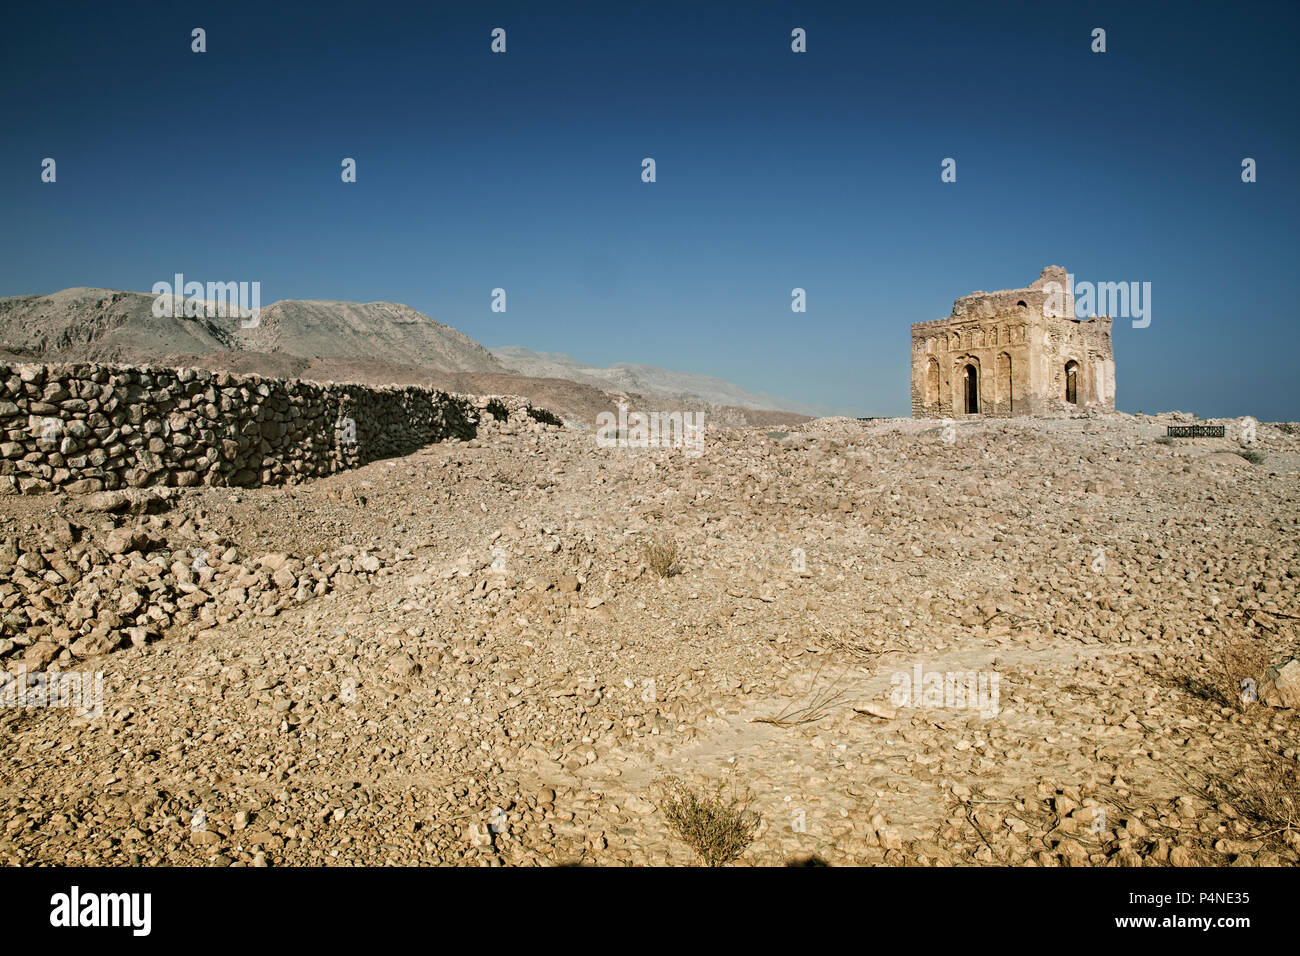 World Heritage site. The ancient 13th century ruins of the mosque built by Bibi Maryam, located in the once thriving merchant city of Qalhat in Oman Stock Photo